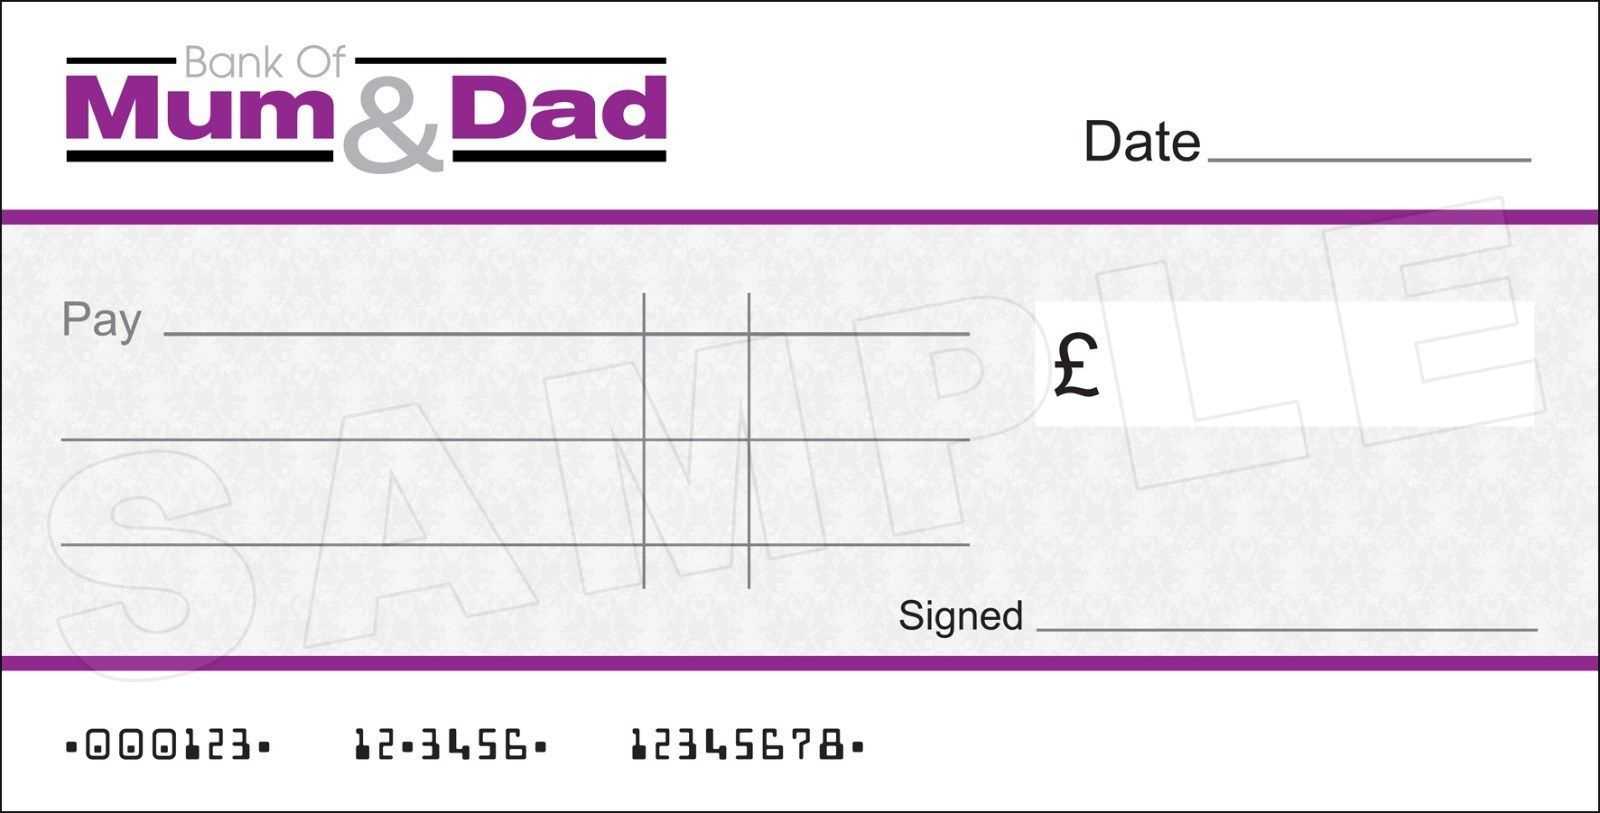 Details About Large Blank Bank Of Mum & Dad Cheque | Dads Pertaining To Fun Blank Cheque Template